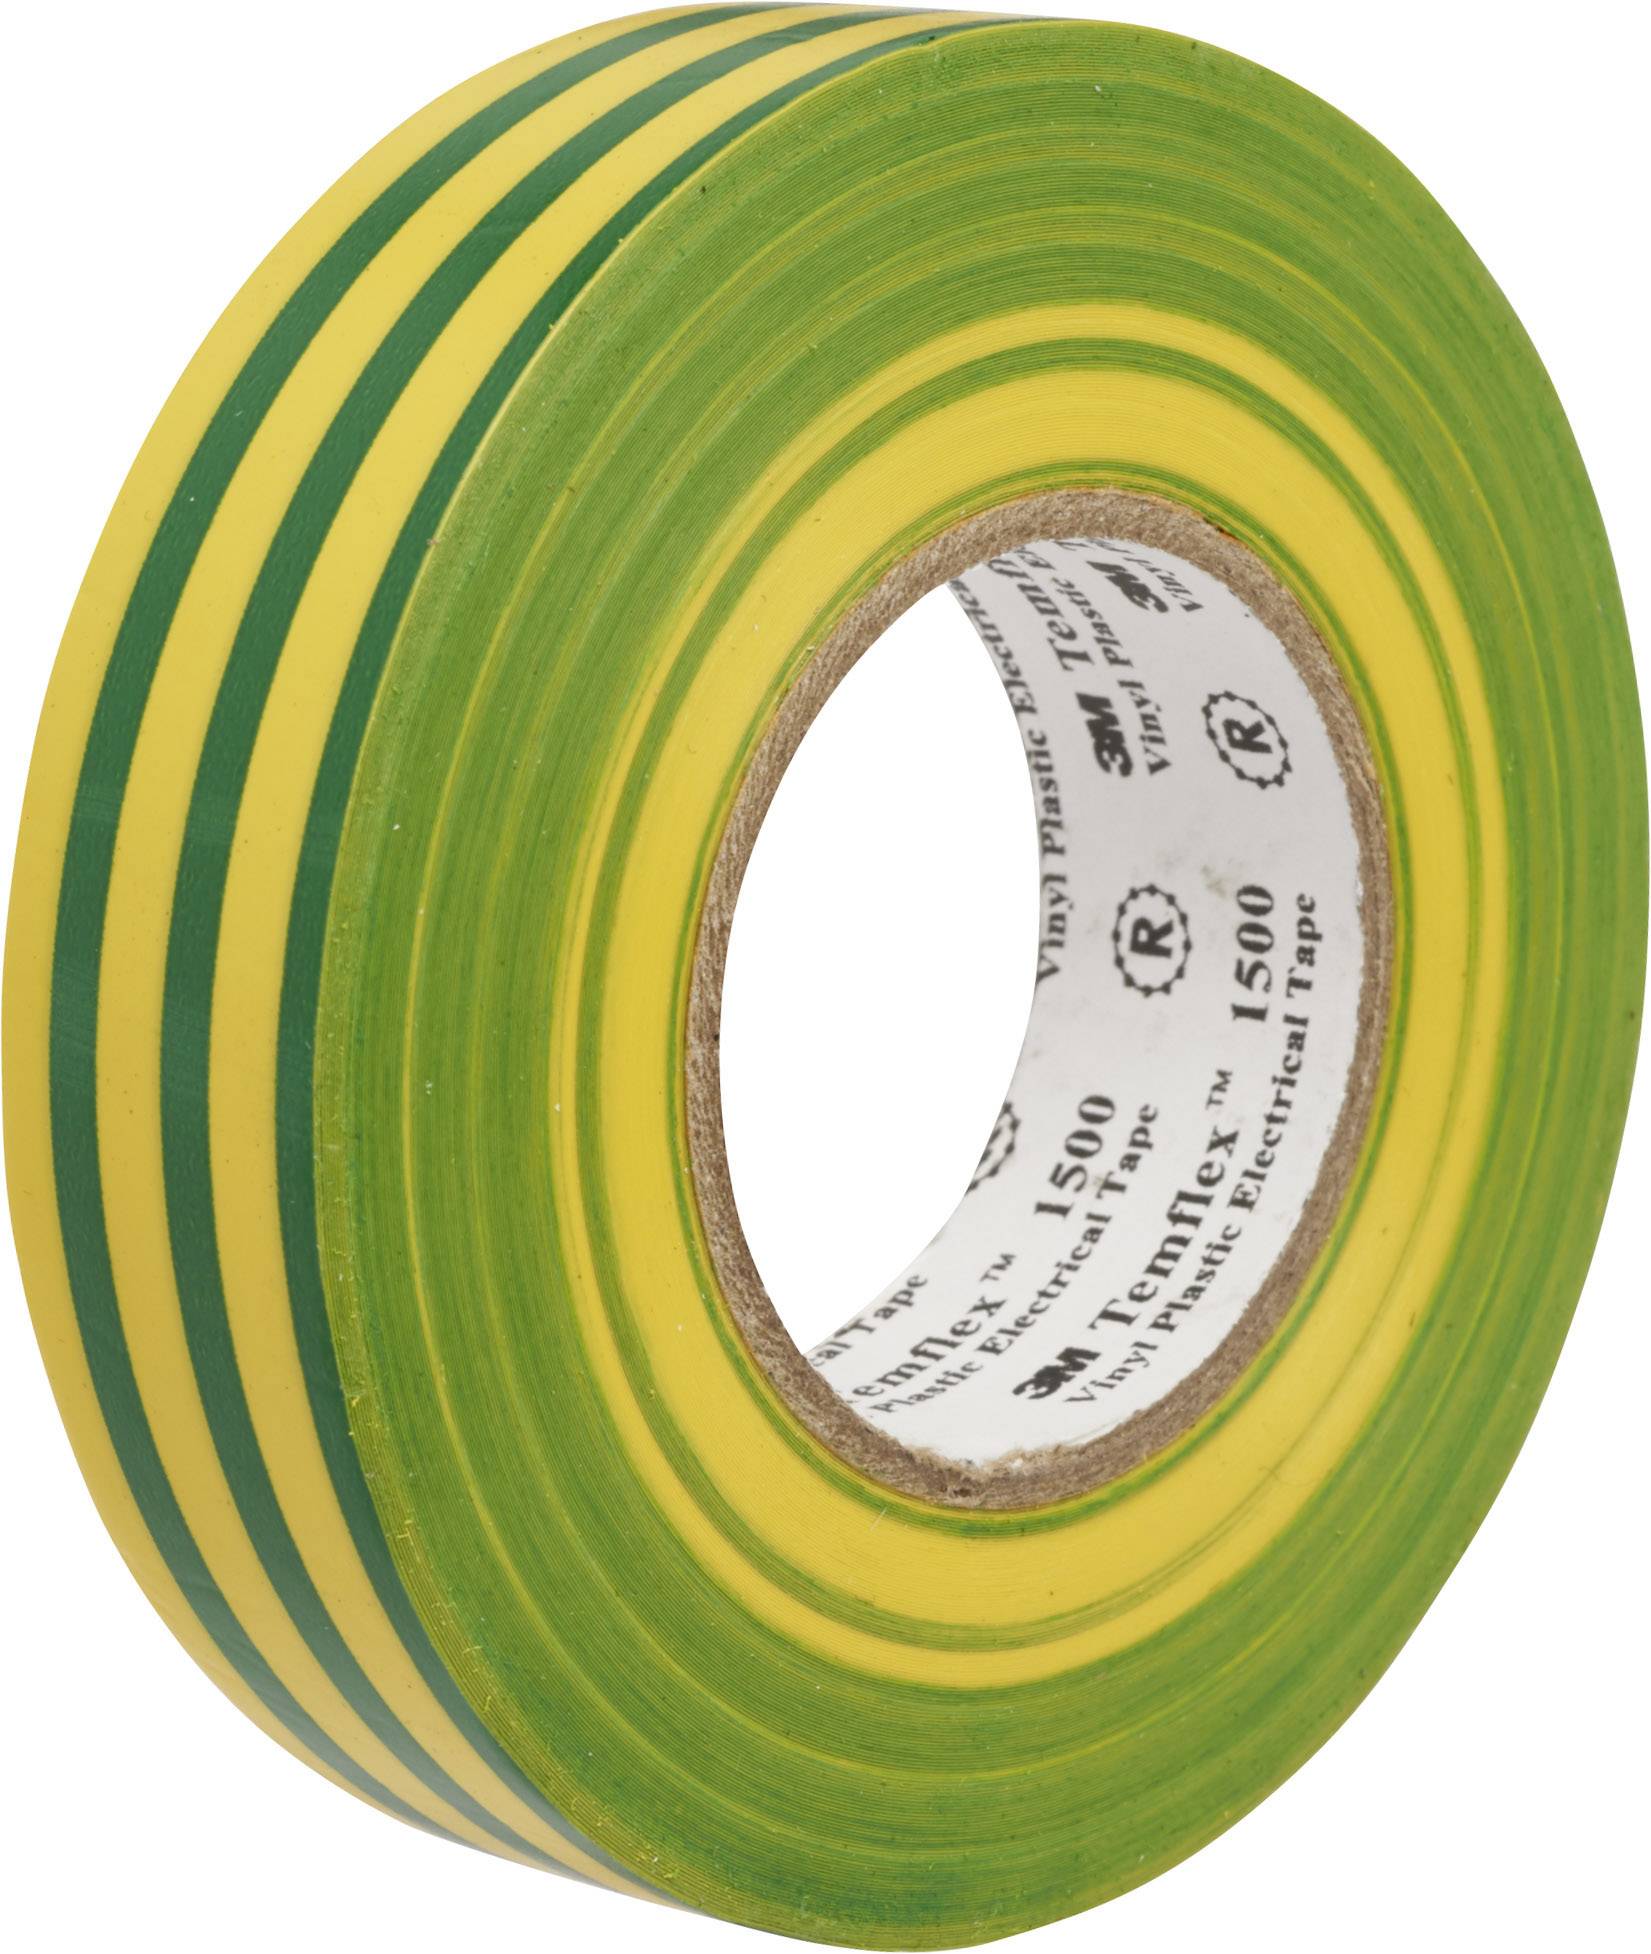 1Pcs  3M 1500 Vinyl Electrical Tape Insulation Adhesive Tape Green 